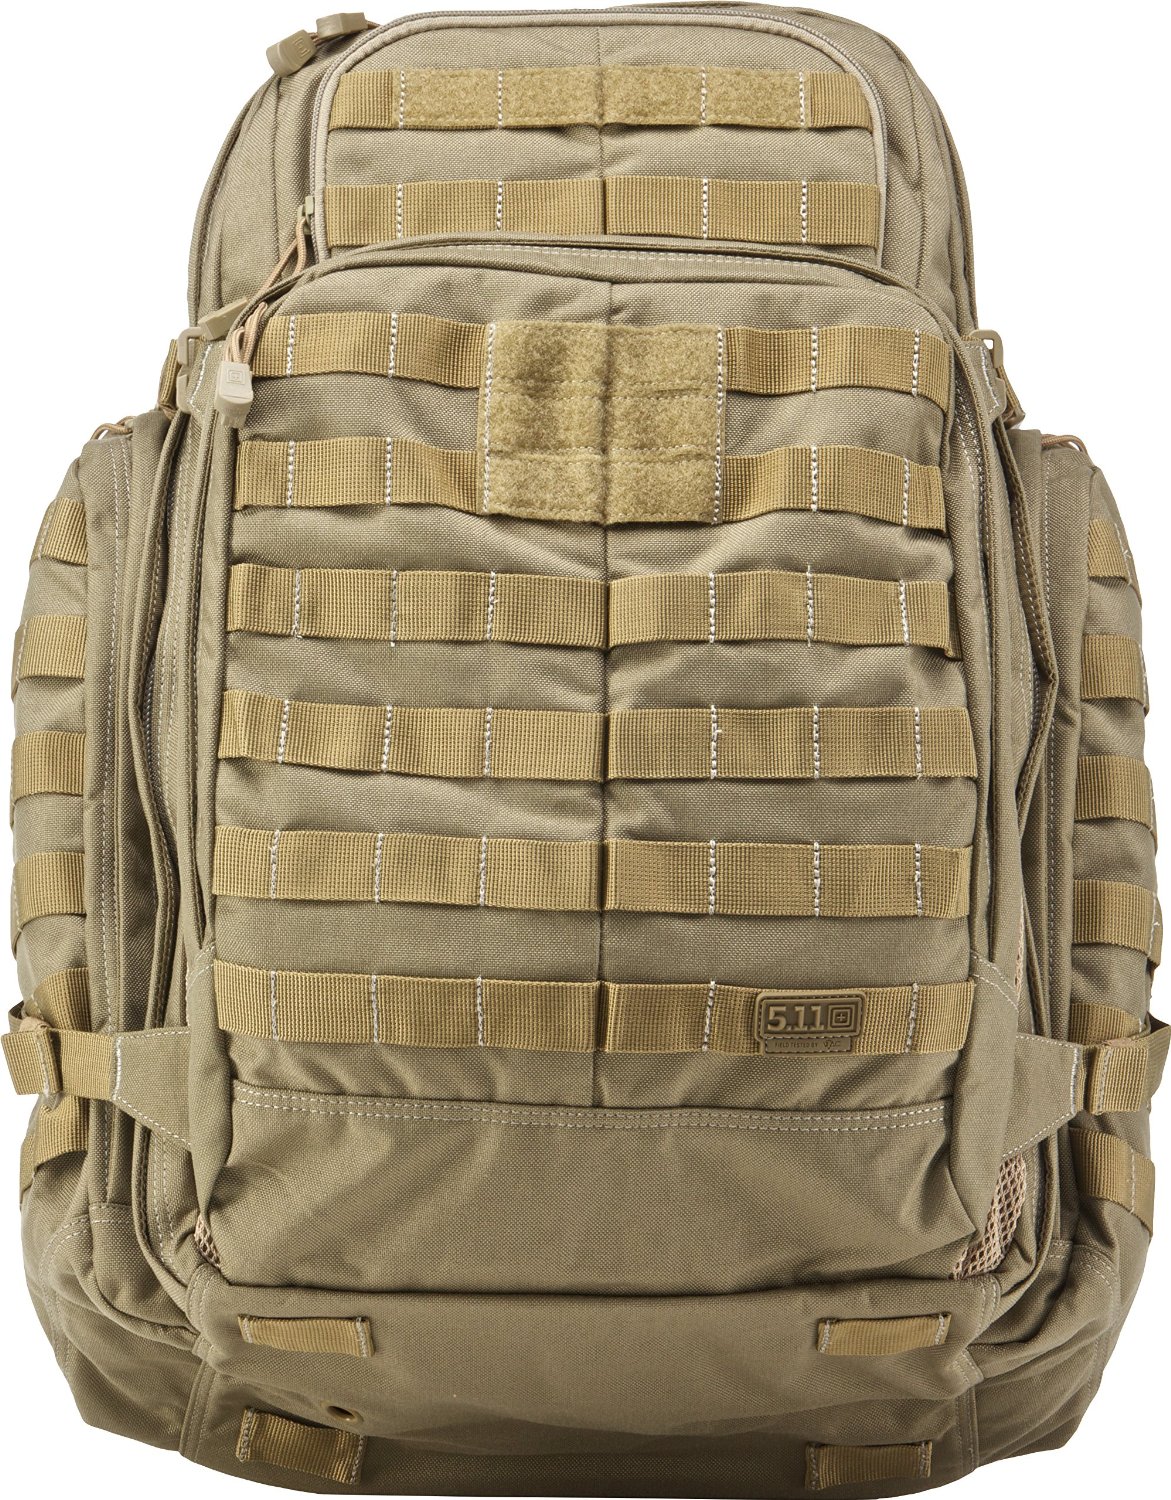 Best molle backpack